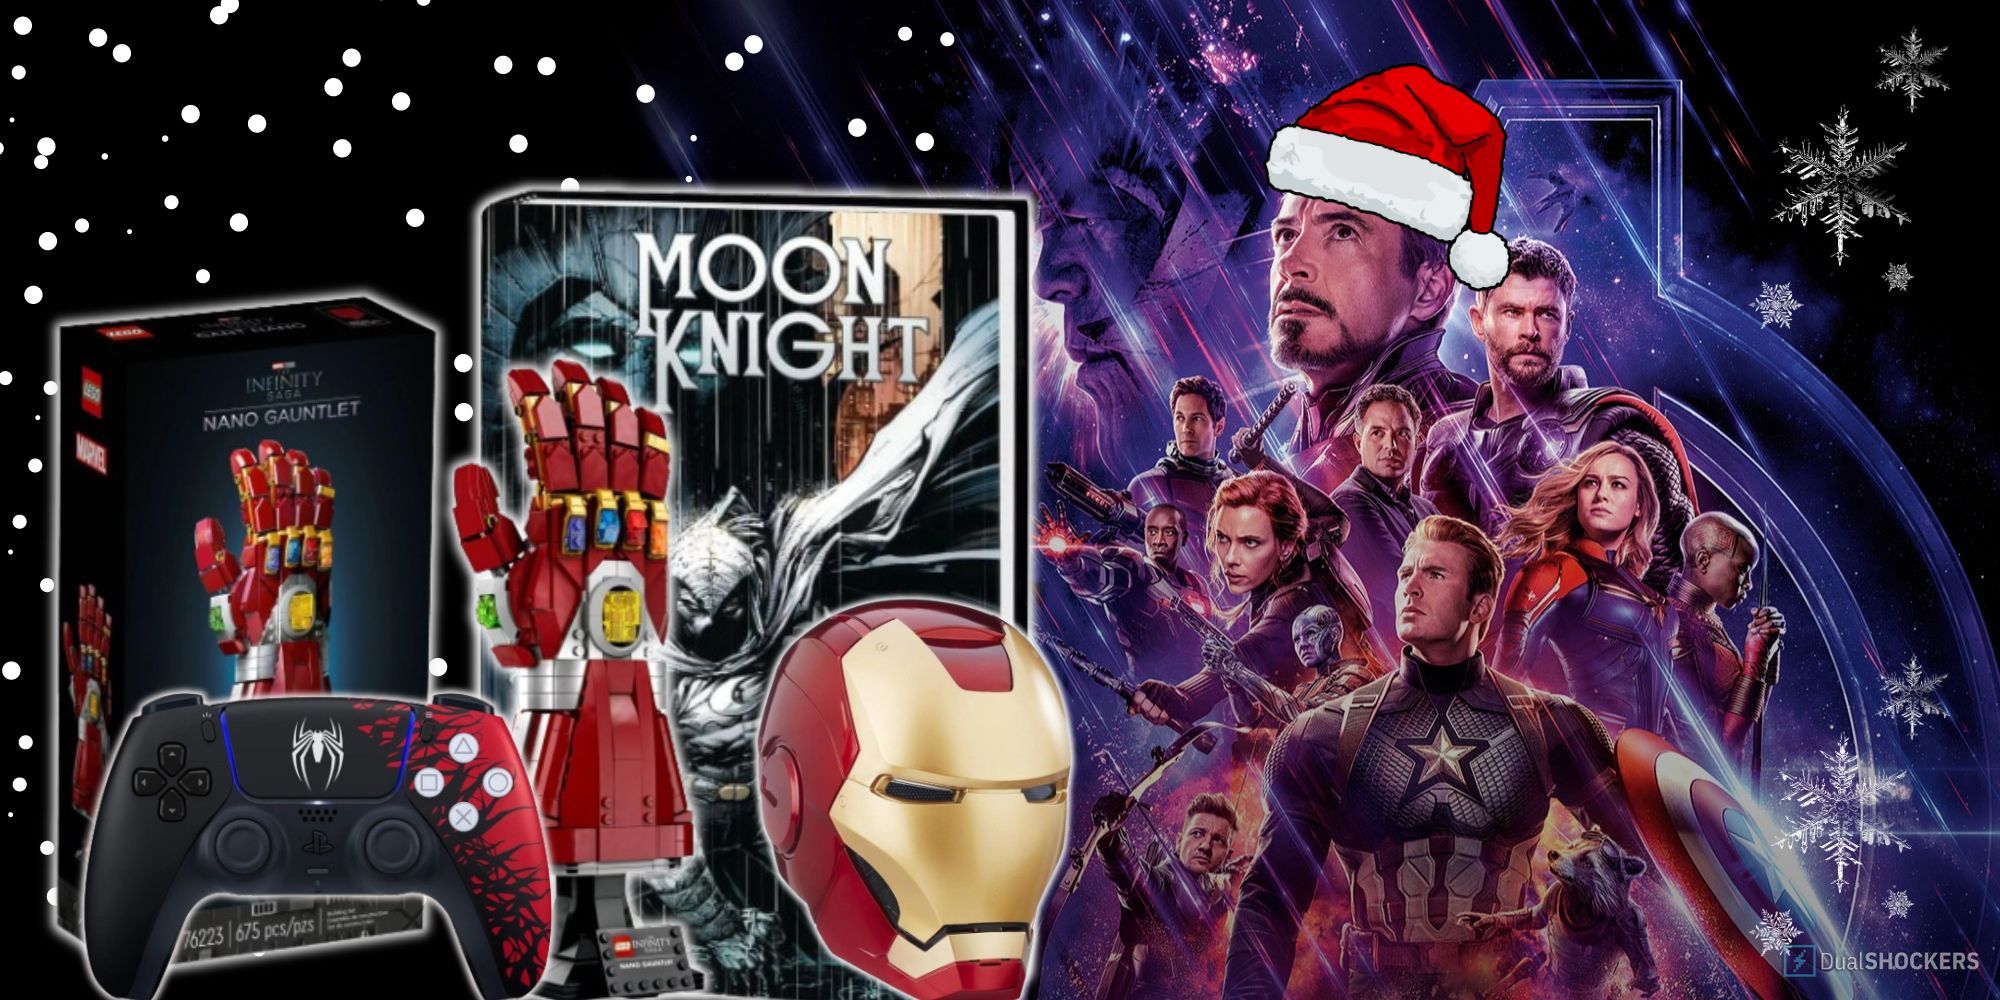 Product banner showcasing a Moon Knight comic, Iron Man helmet, Spider-Man PS5 controller, and the Nano Gauntlet LEGO set alongside an ensemble photo of the Avengers